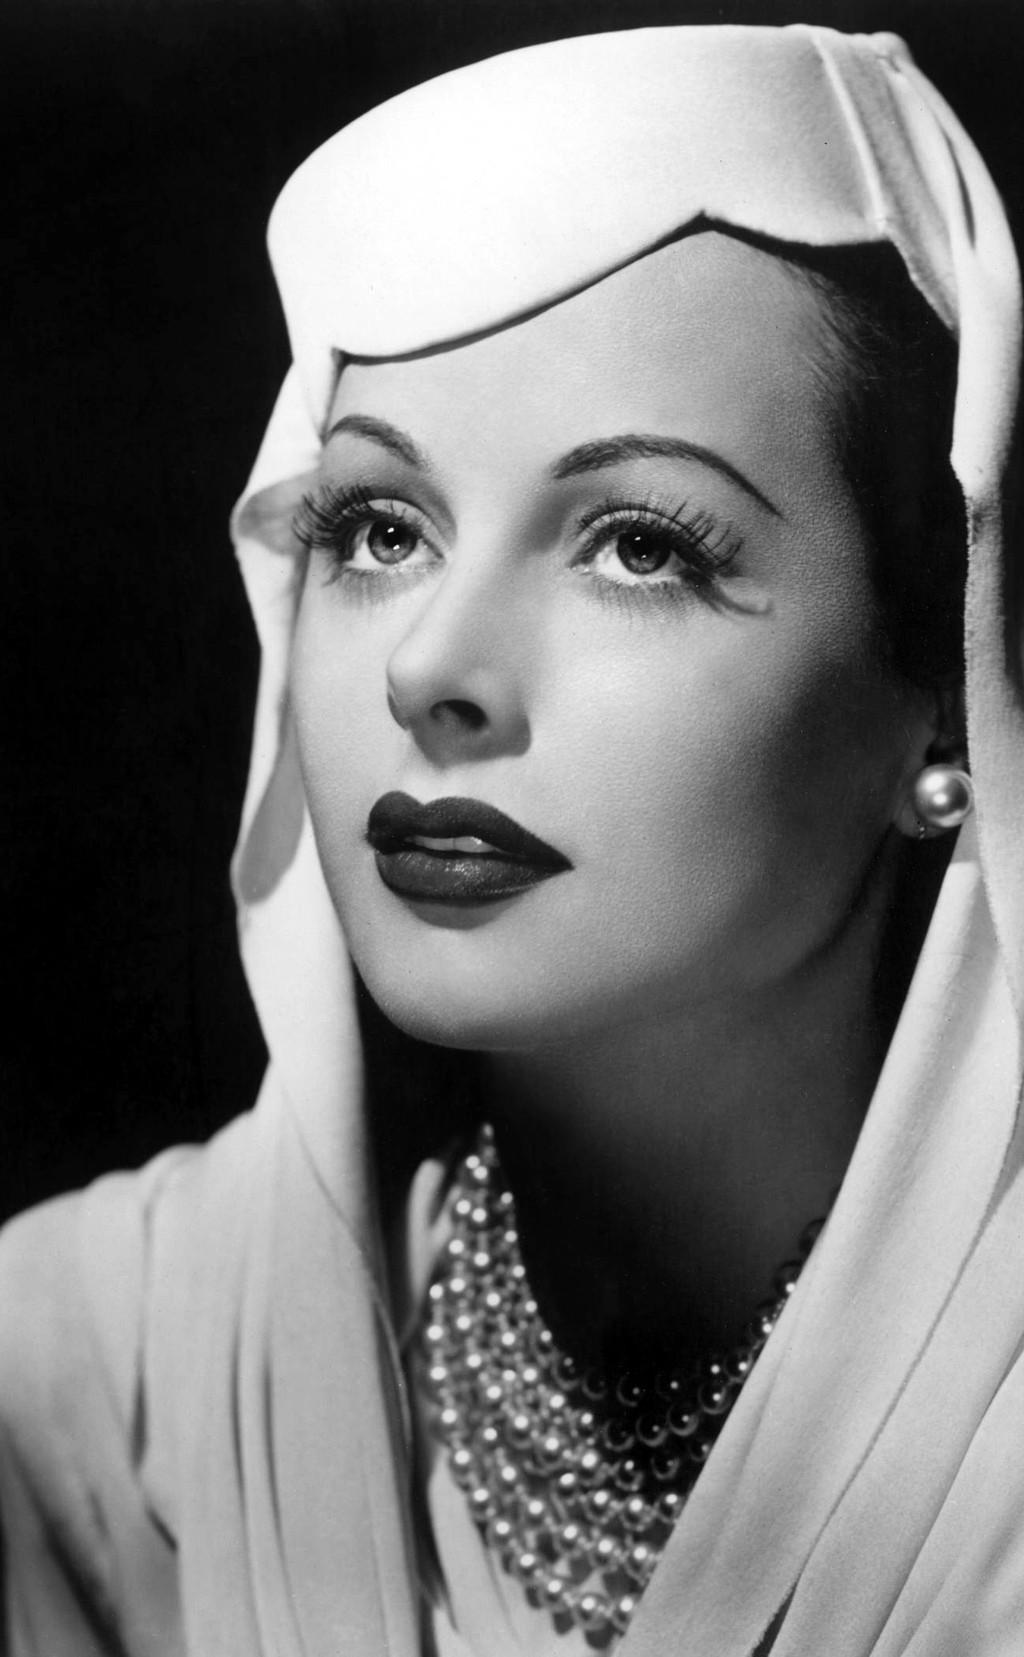 For Hedy Lamarr